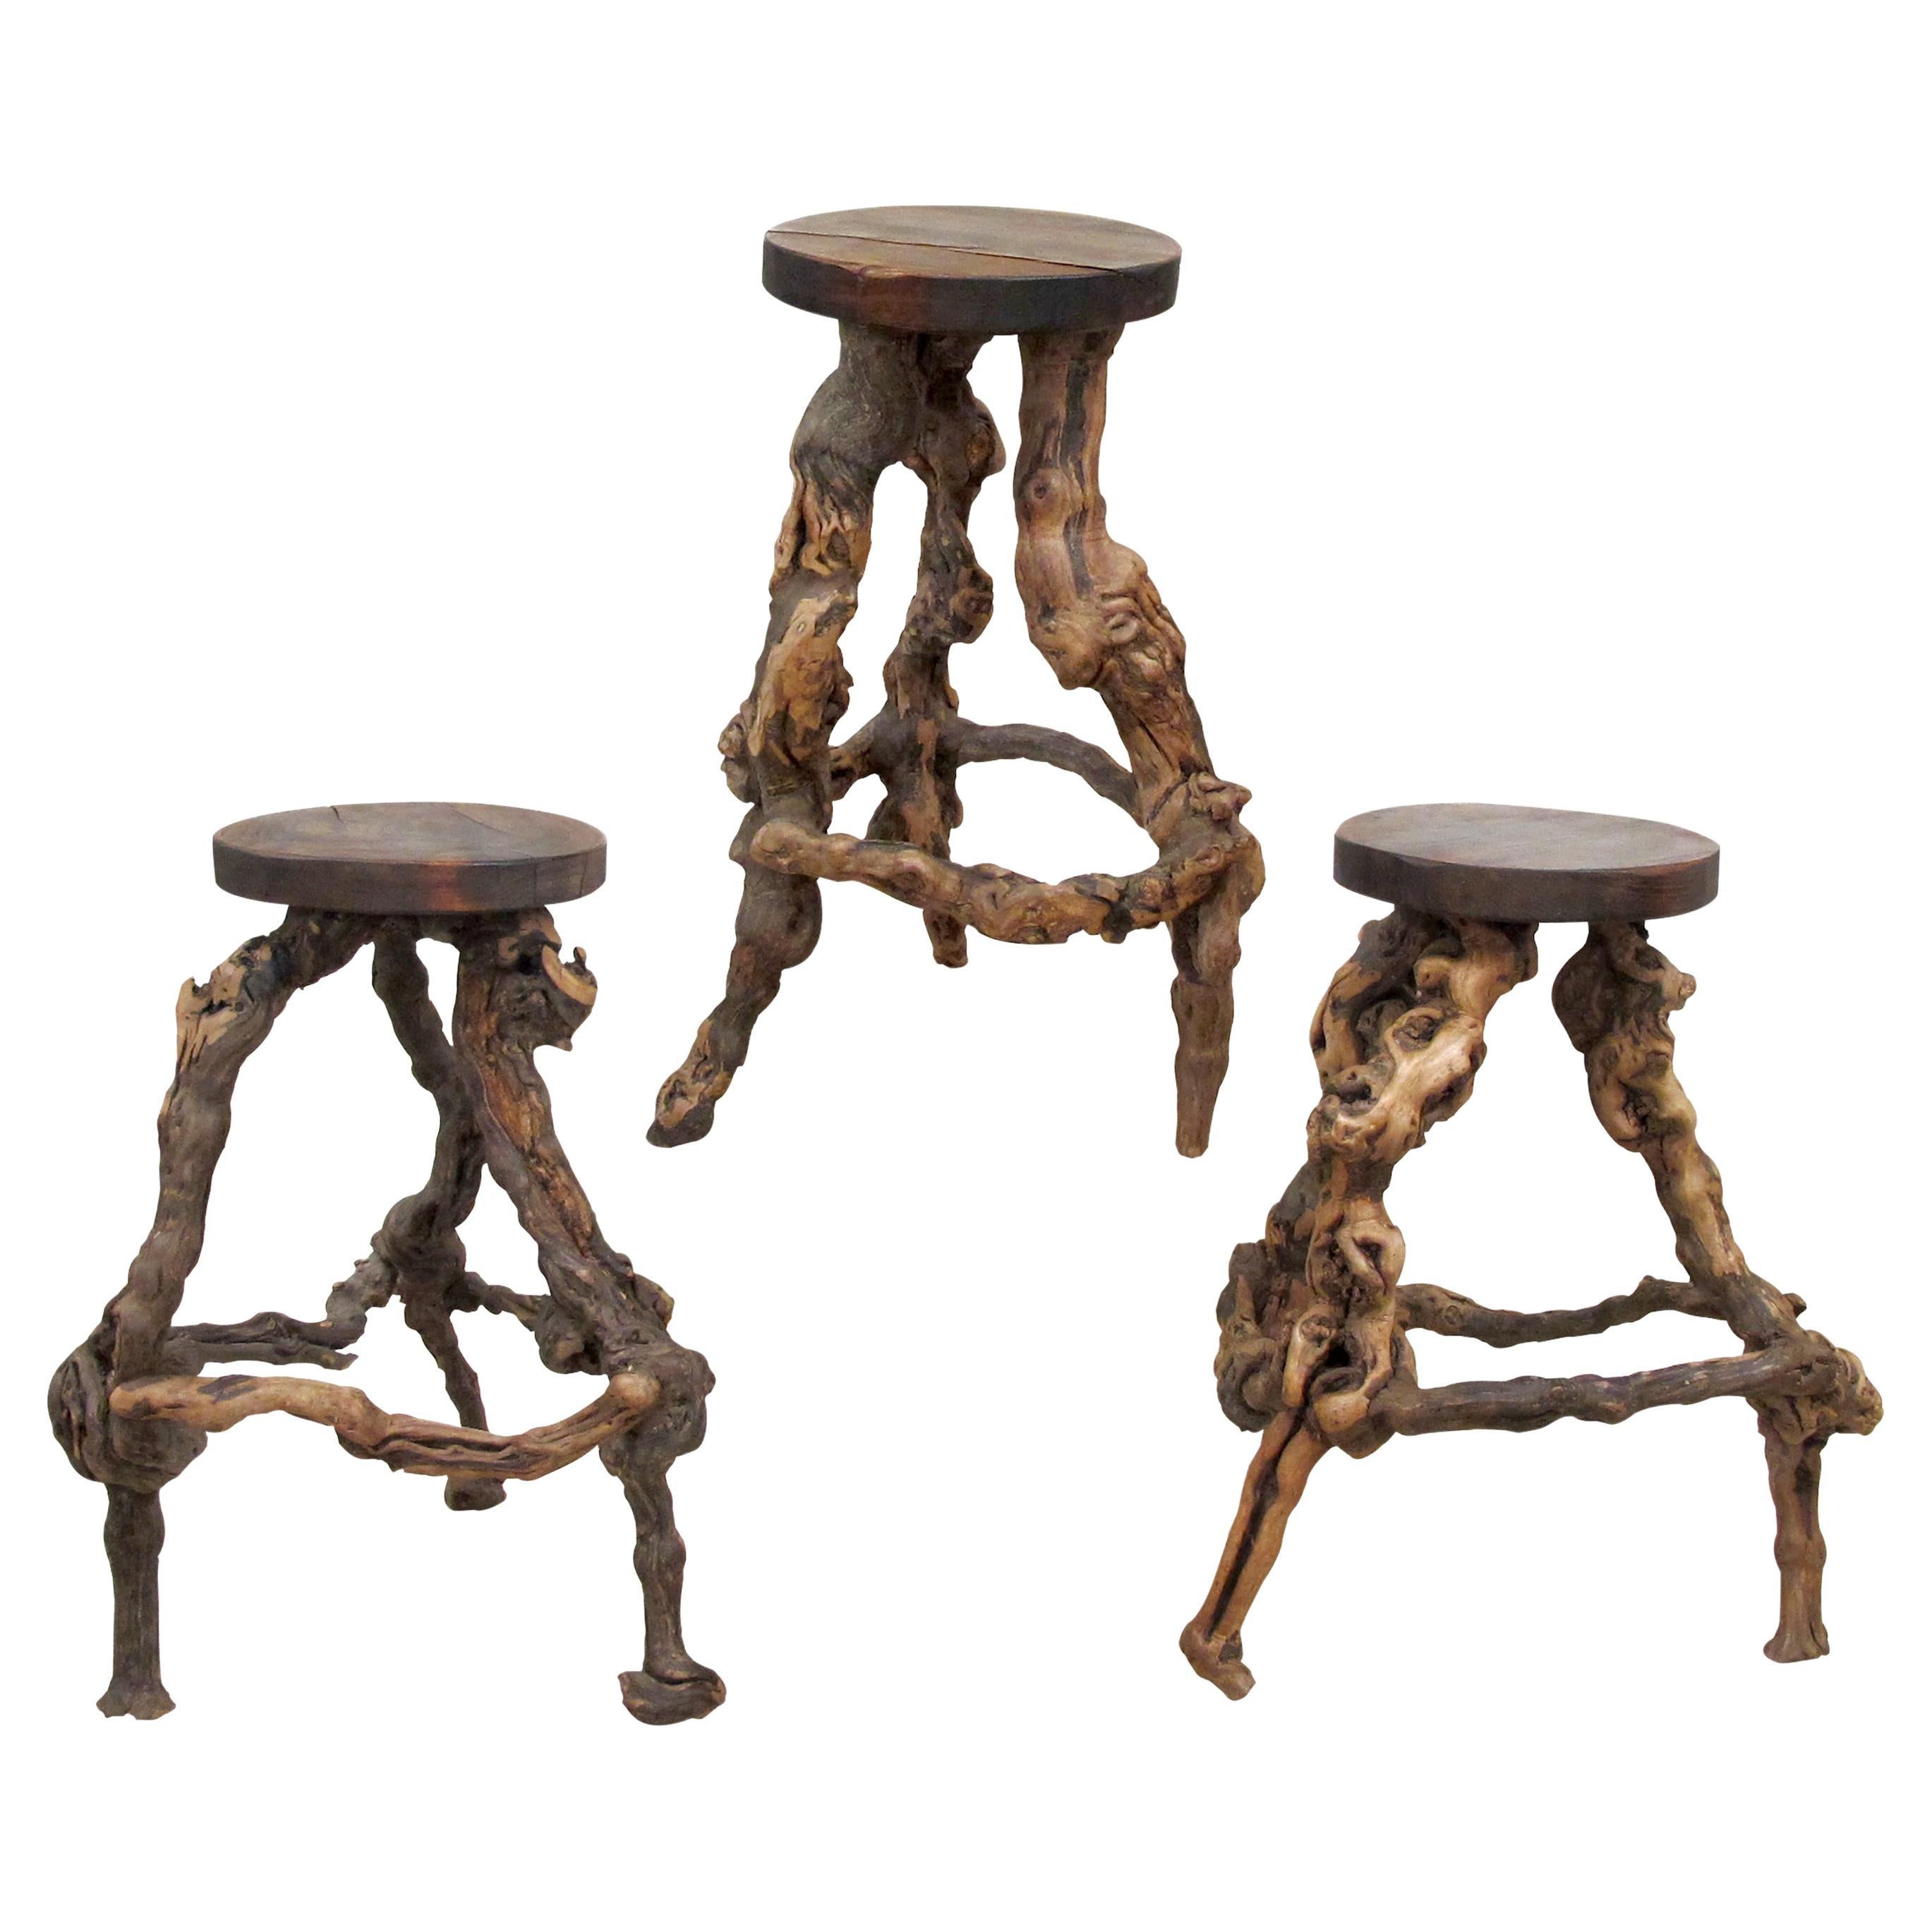 Set of 3 1950s Mid Century French Twisted Handcrafted Grapevine Root Bar Stools